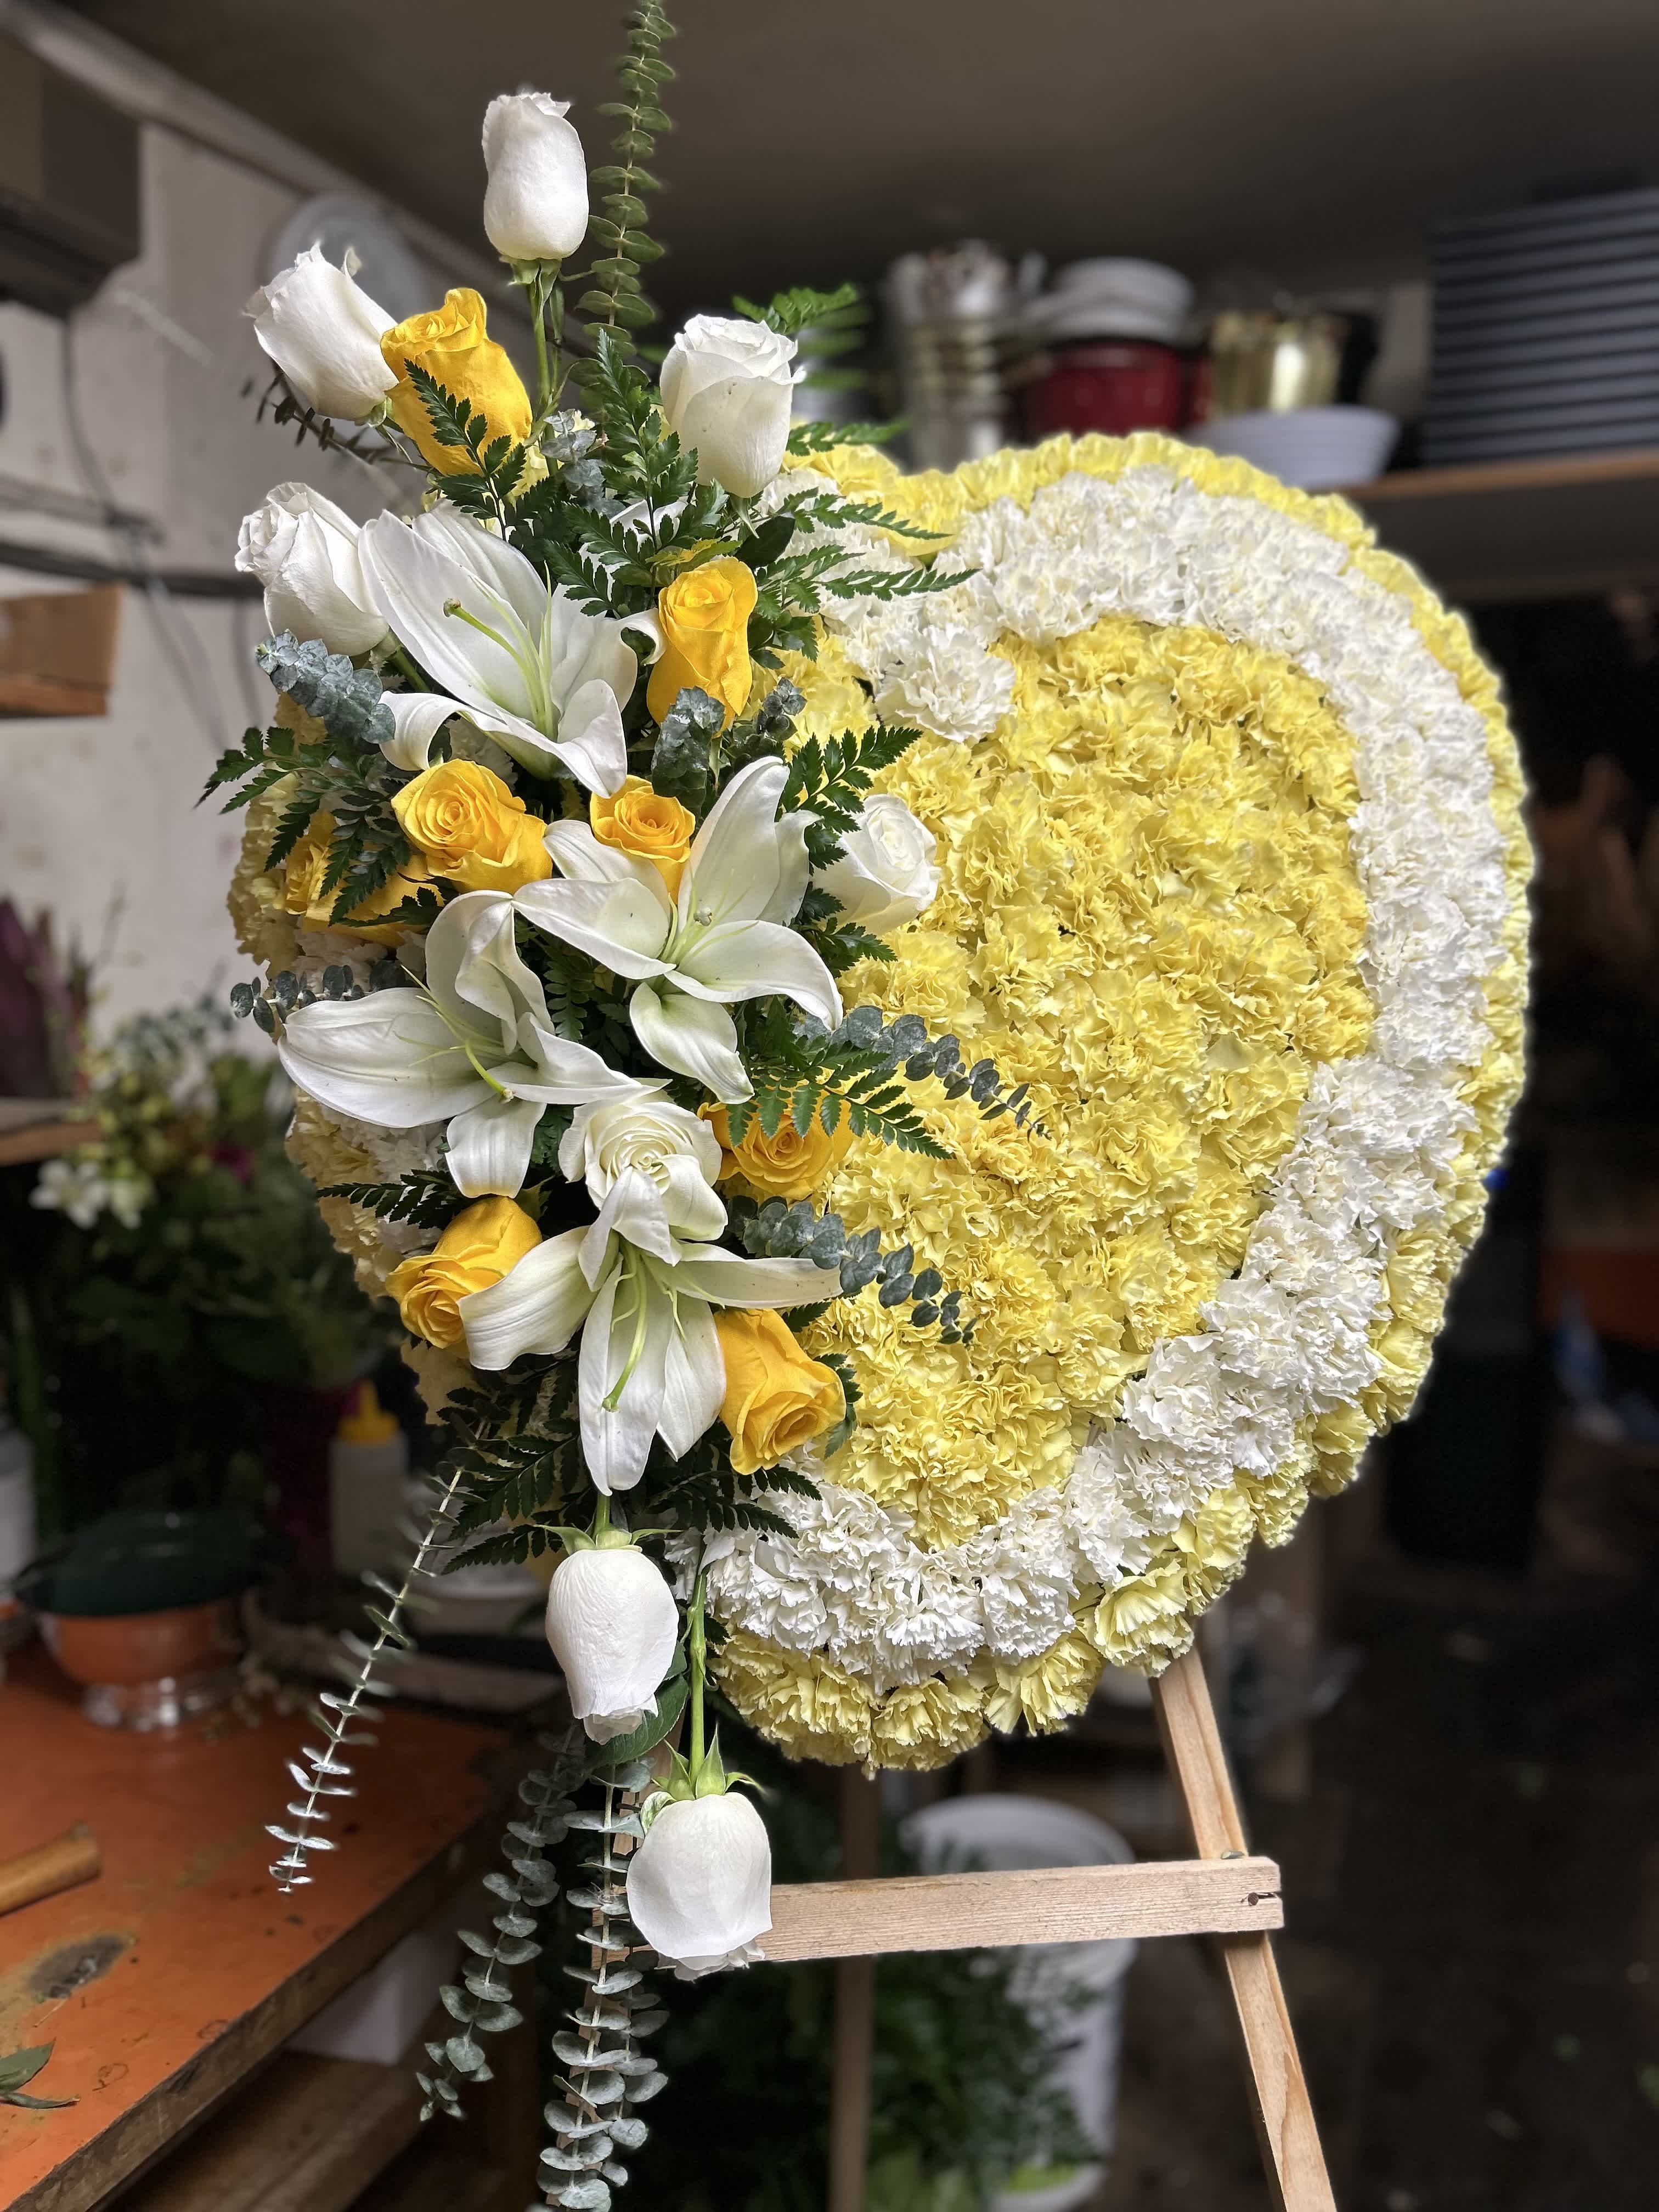 FROM YOUR HEART - SYM-277 - A beautiful solid heart with white and yellow flowers.  Picture is Premium size.